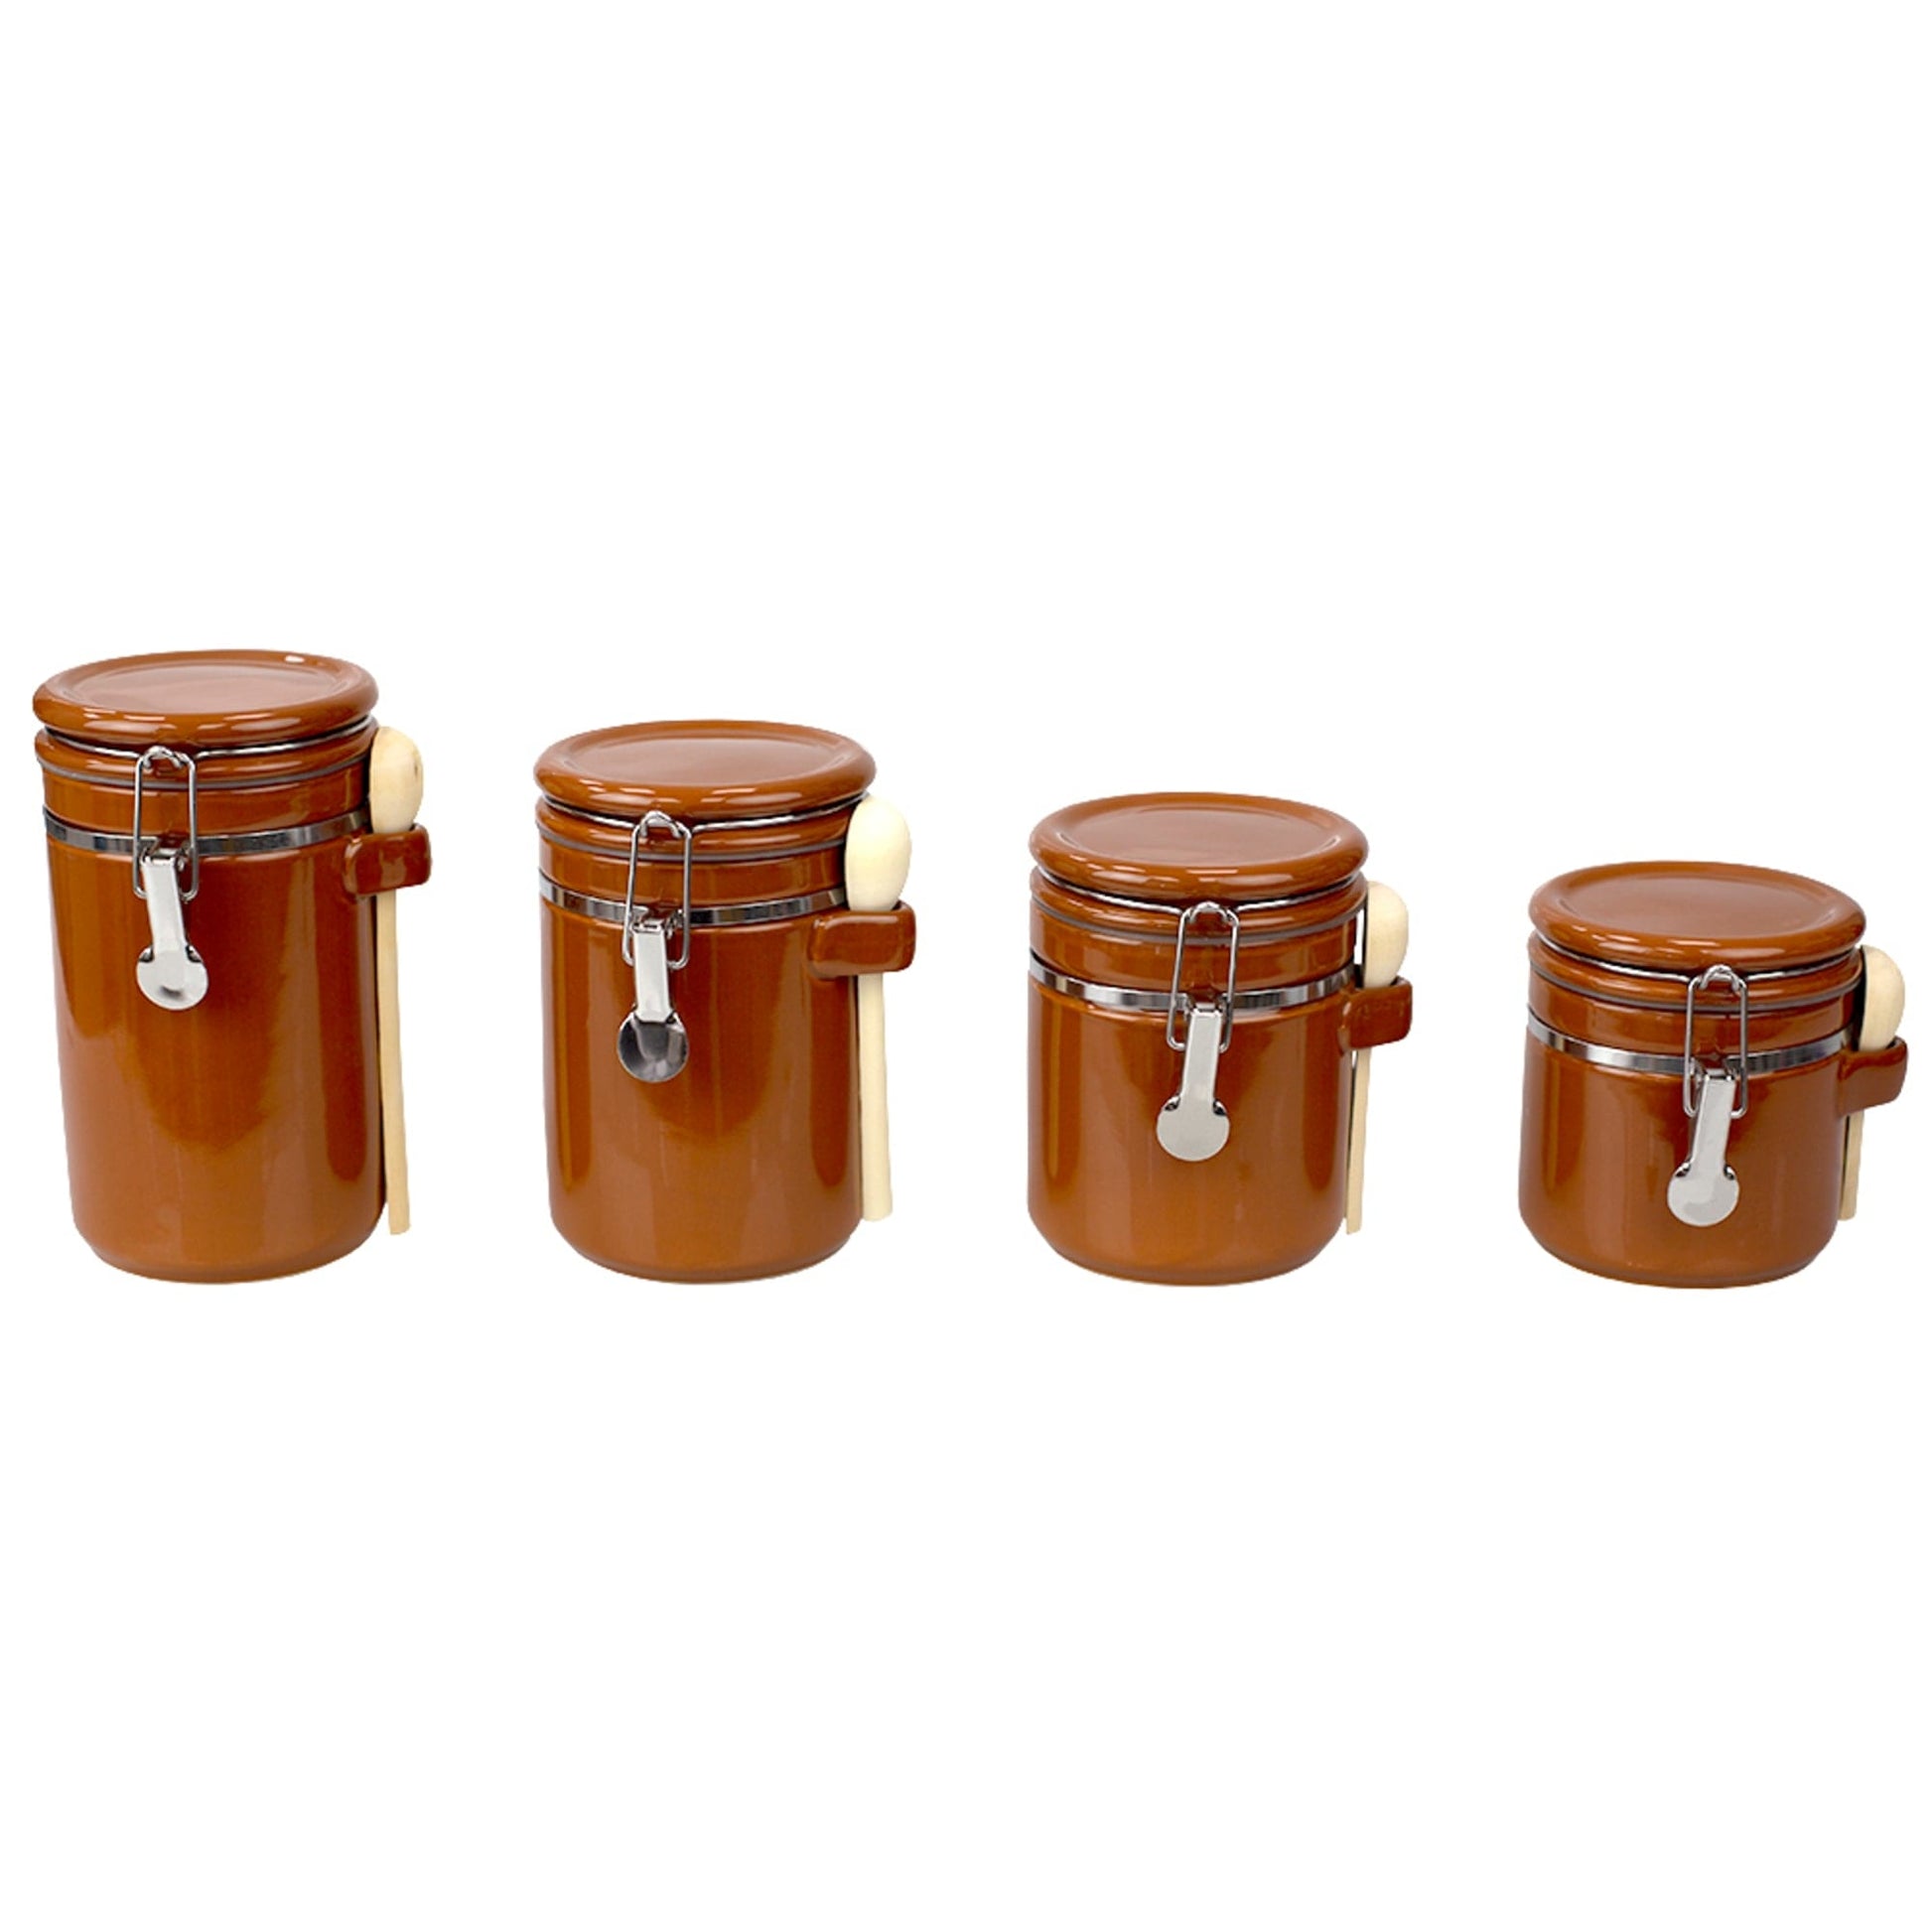 BIG SALE!!! Food Storage containers canister set - Set of 4 Air